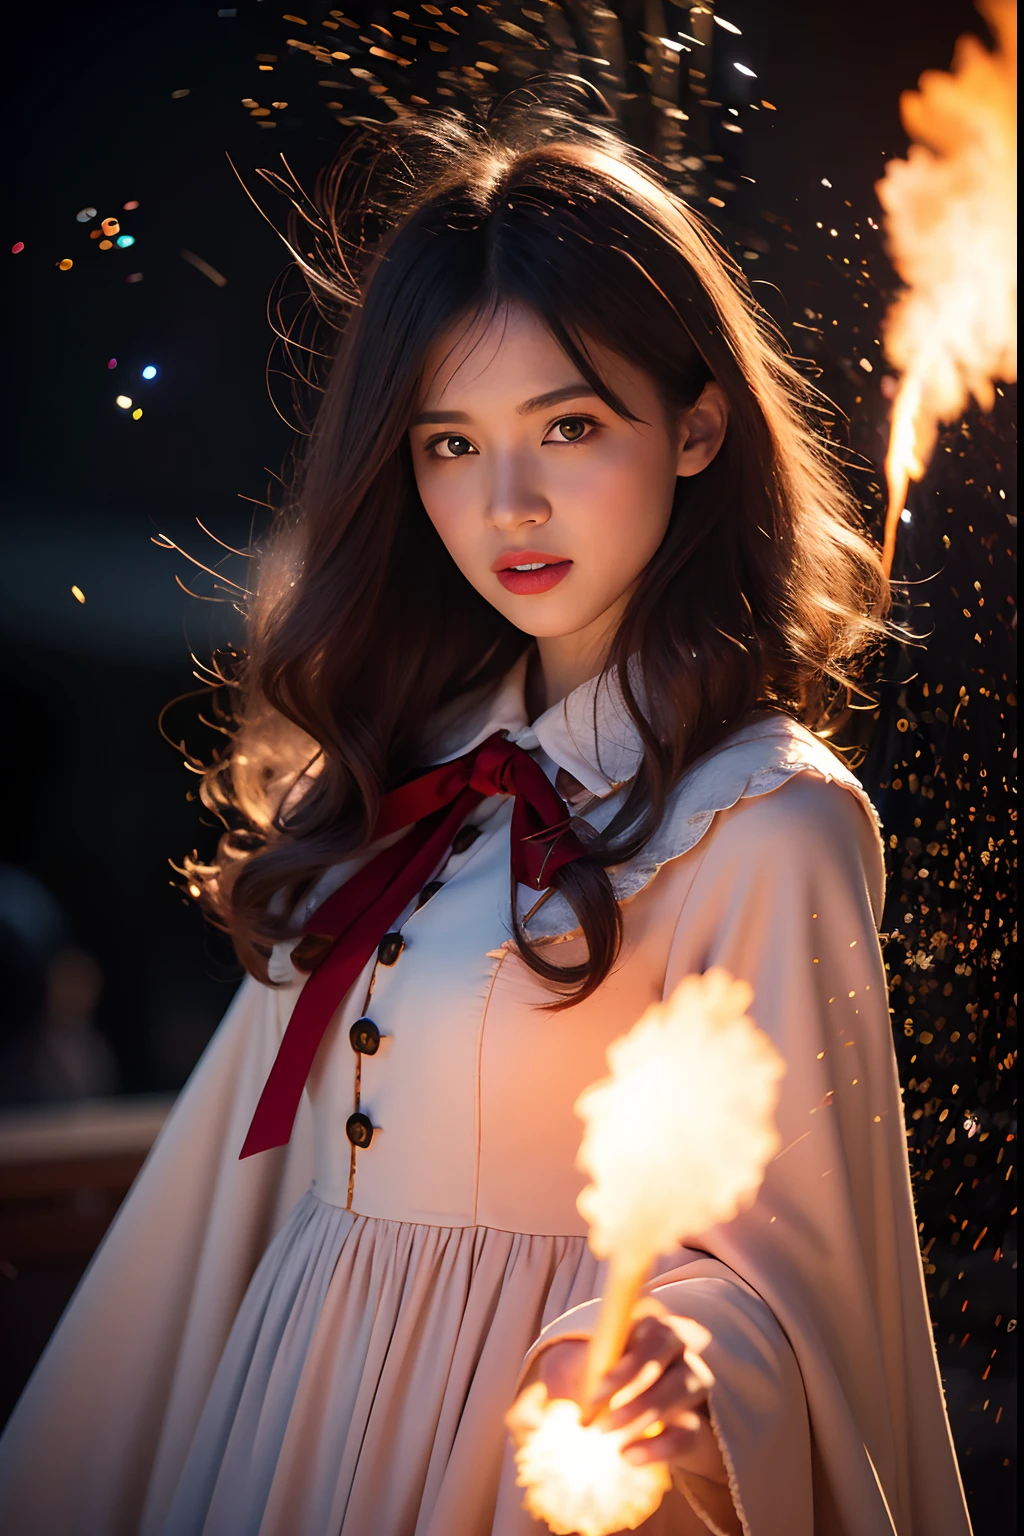 RAW photo, full sharp, (Full HD epic wallpaper) 8K  UHD, Digital SLR, Soft lighting, High quality, filmgrain, Fujifilm XT3, hiqcgbody, (1人, Kizi:1.2),the night，Focus above the thighs, Broken glass effect, Vivid yellow flame, Ethereal sparks, vulnerable, Red eyes, (Long gray hair),Wind，Fluttering head， buzz cut, Style - Gravity magic, Looking down, Solo, , Detailed background, Detailed face, Pale complexion,((Gorgeous Lolita costume)), Black cloak, Cape, Hood, malicious expression, The scarlet symbol rotates in the air,(Floating fire particles, particle fx), Skylight color scheme, ( Huge red explosion flames), the are In the background, Surrounded by a crimson mist, Sunset, symetrical composition, Epic atmosphere,(Smoky)，